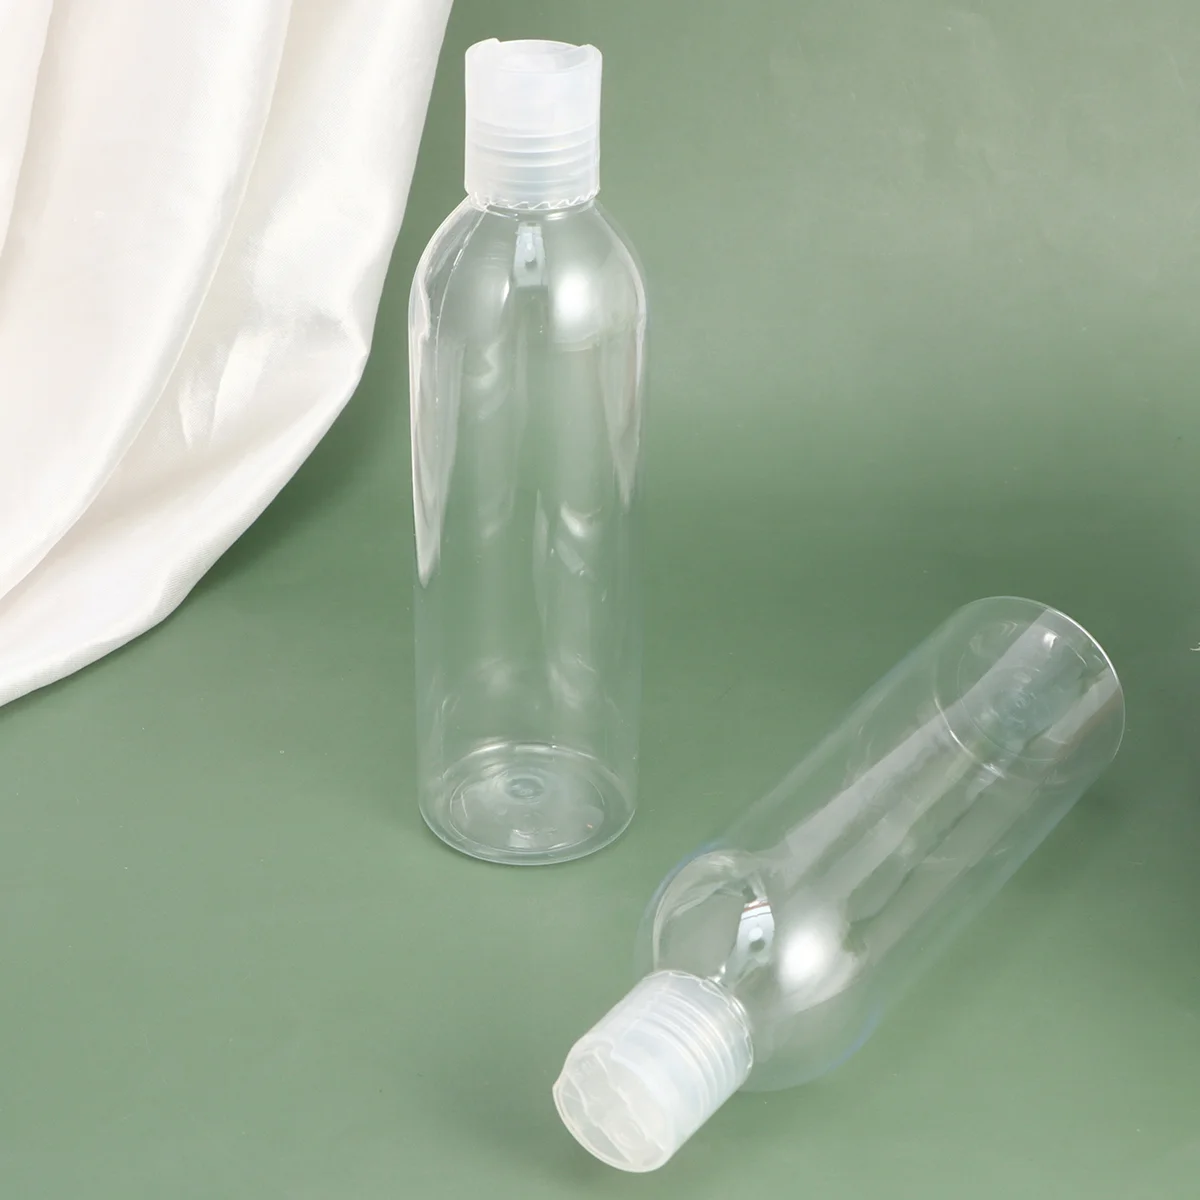 

Refillable Bottles Containers: 6pcs 250ml Transparent Squeezable Shampoo Bottle Toiletry Bottles with Press Disc Cap for Lotions